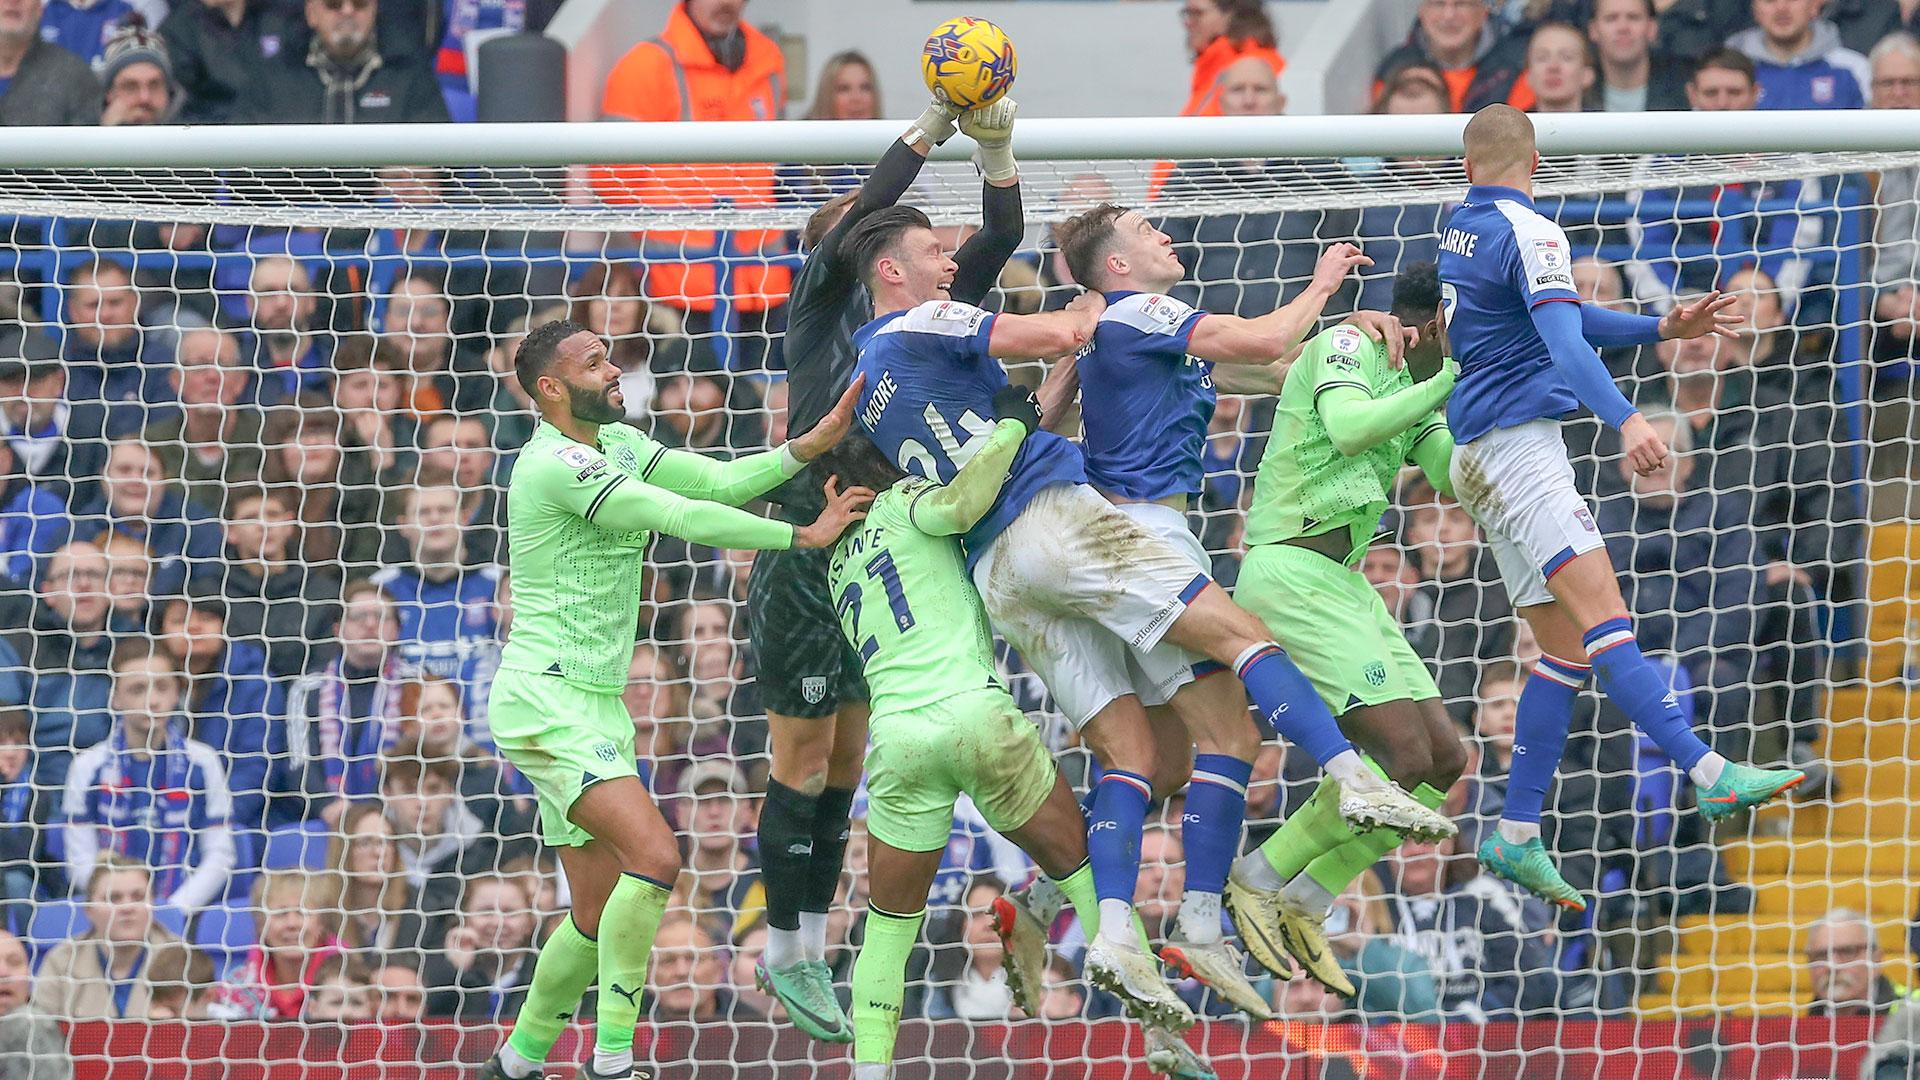 Ipswich Town v West Bromwich Albion